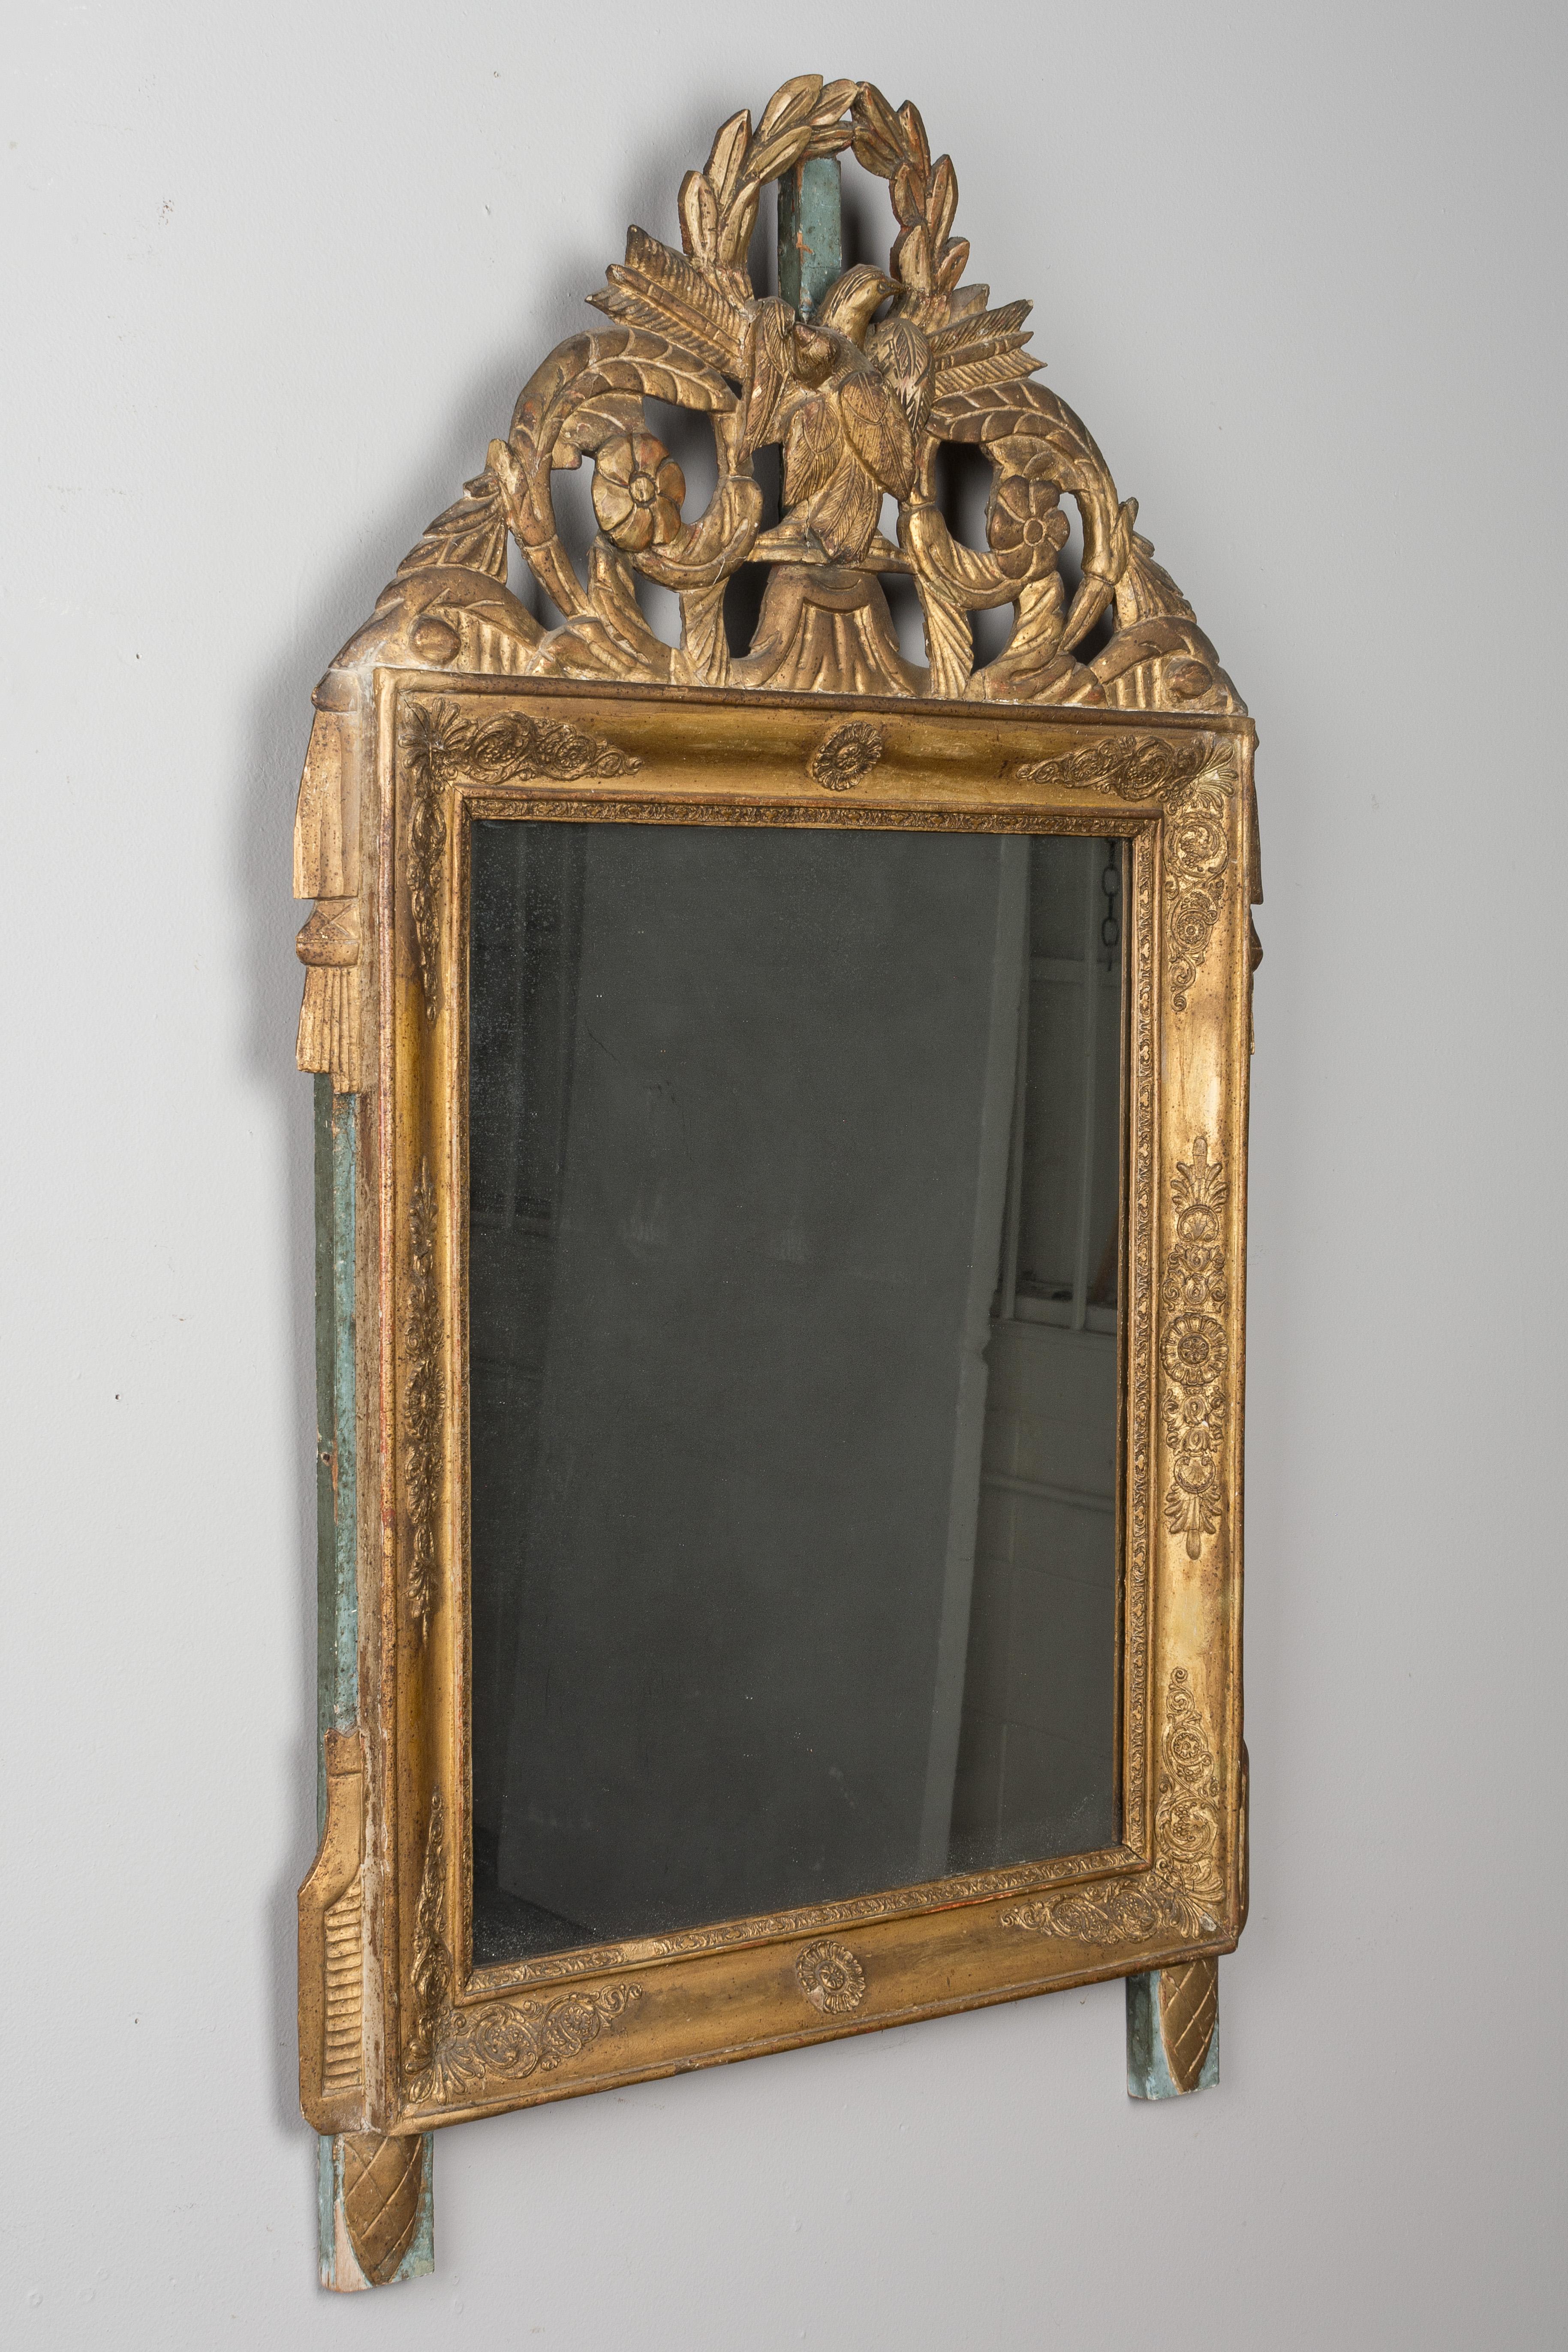 An early 19th century Louis XVI style French parcel-giltwood bridal mirror from Provence. Nice hand carved crest with a pair of lovebirds, scrolling leaves and laurel wreath. This is a Bridal mirror. All original with some restorations on the crest